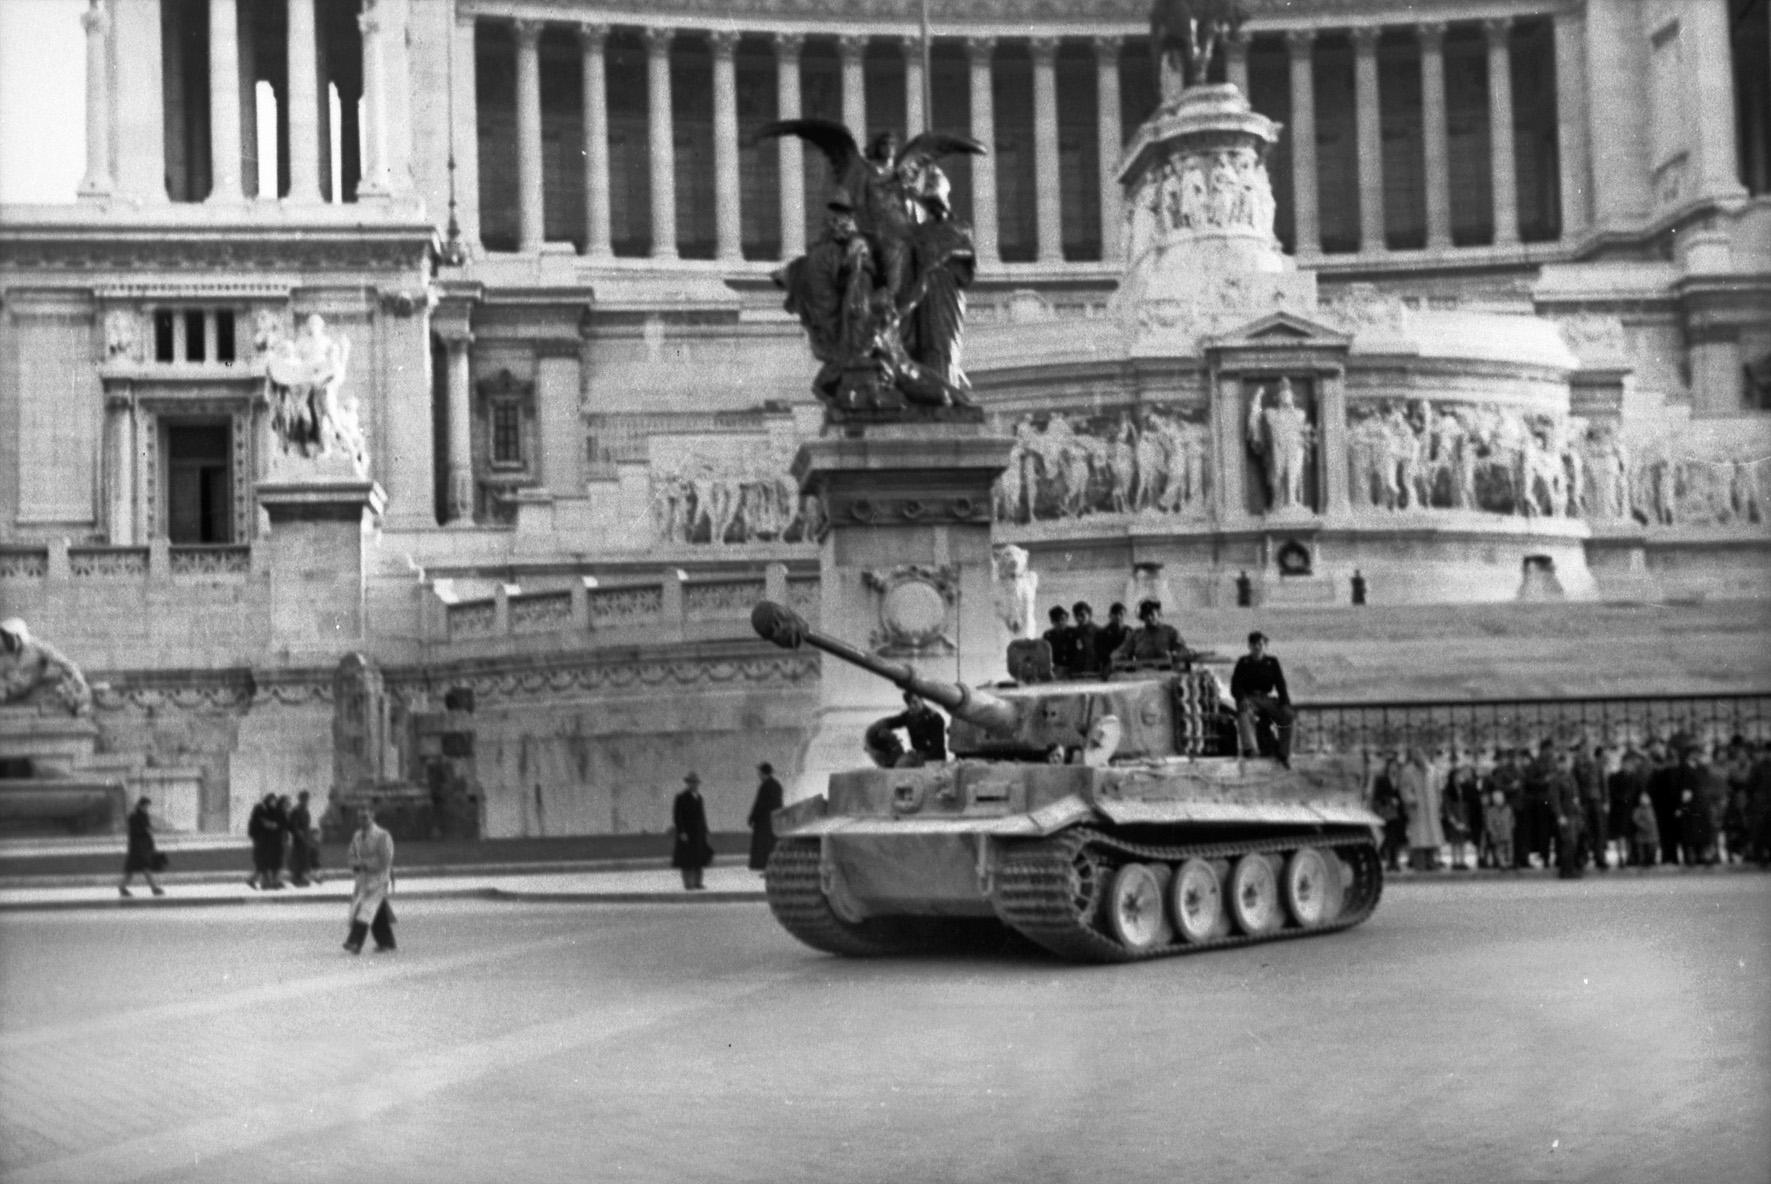 A German PzKpfw. VI Tiger tank sits in Rome before the national monument to King Victor Emmanuel II. After the Italian government removed Benito Mussolini, Hitler dispatched German forces in large numbers to occupy the country. 